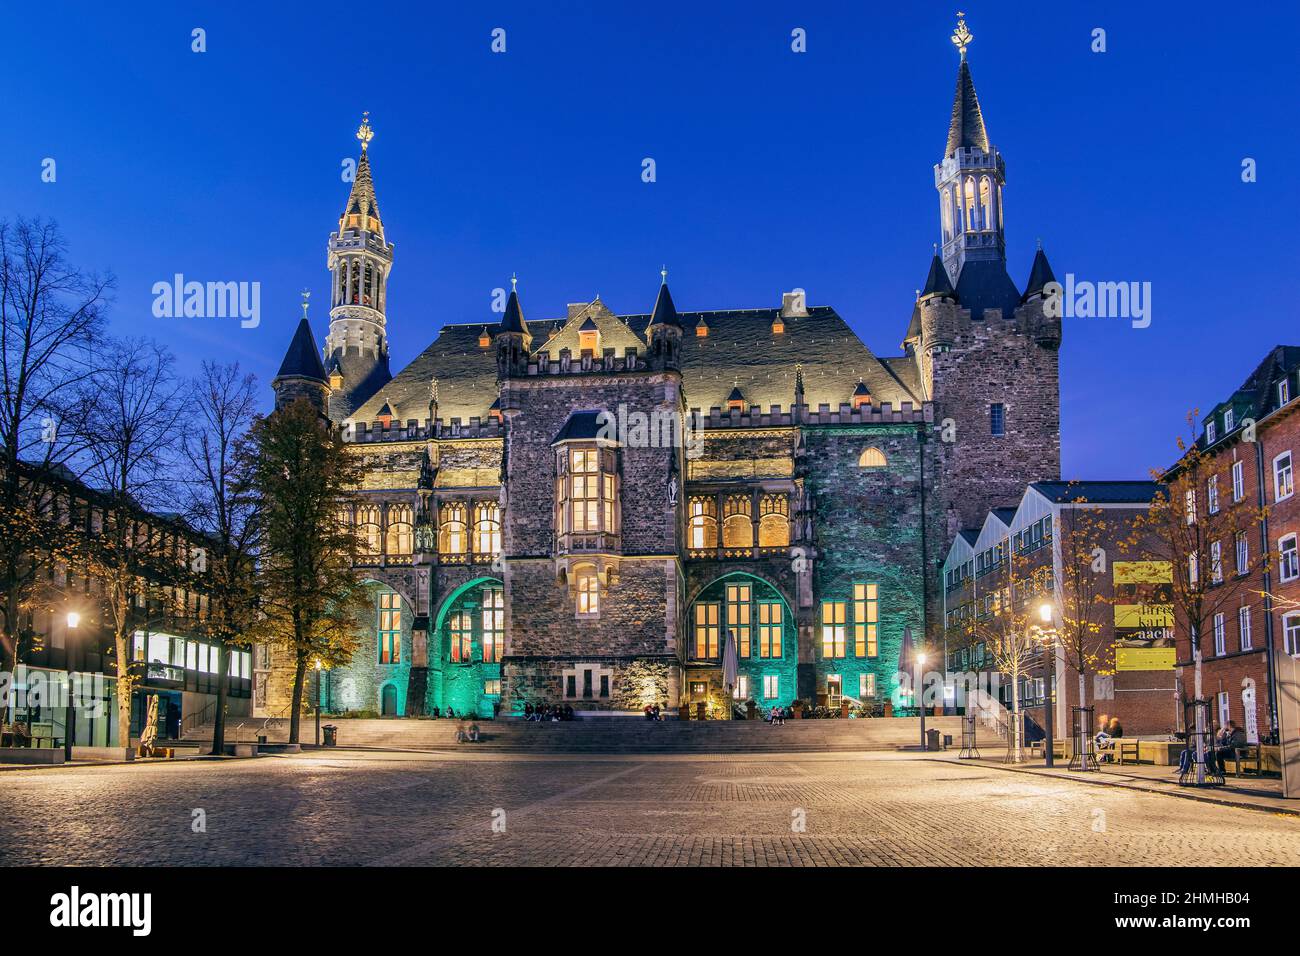 Katschhof with south view from the Gothic town hall at night, Aachen, North Rhine-Westphalia, Germany Stock Photo